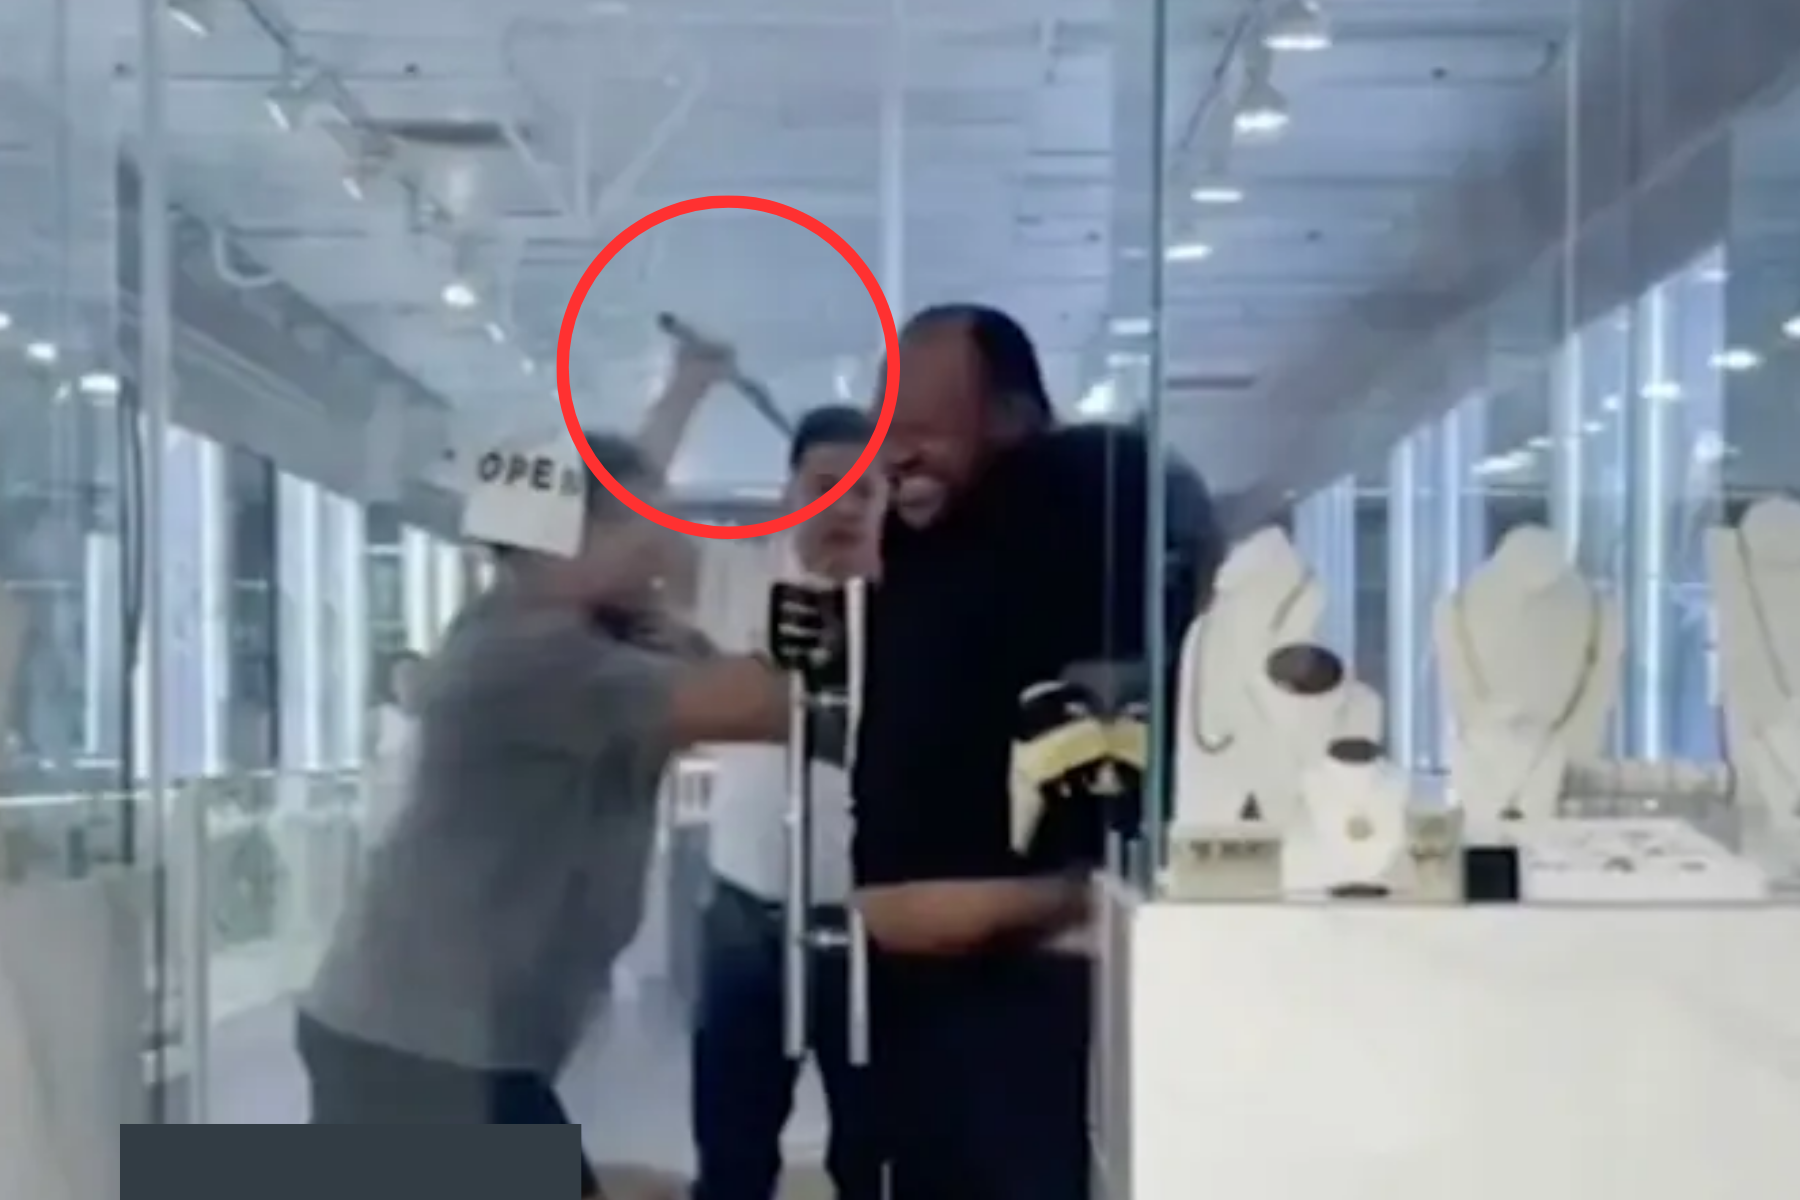 The employees even used a stick to beat the thief